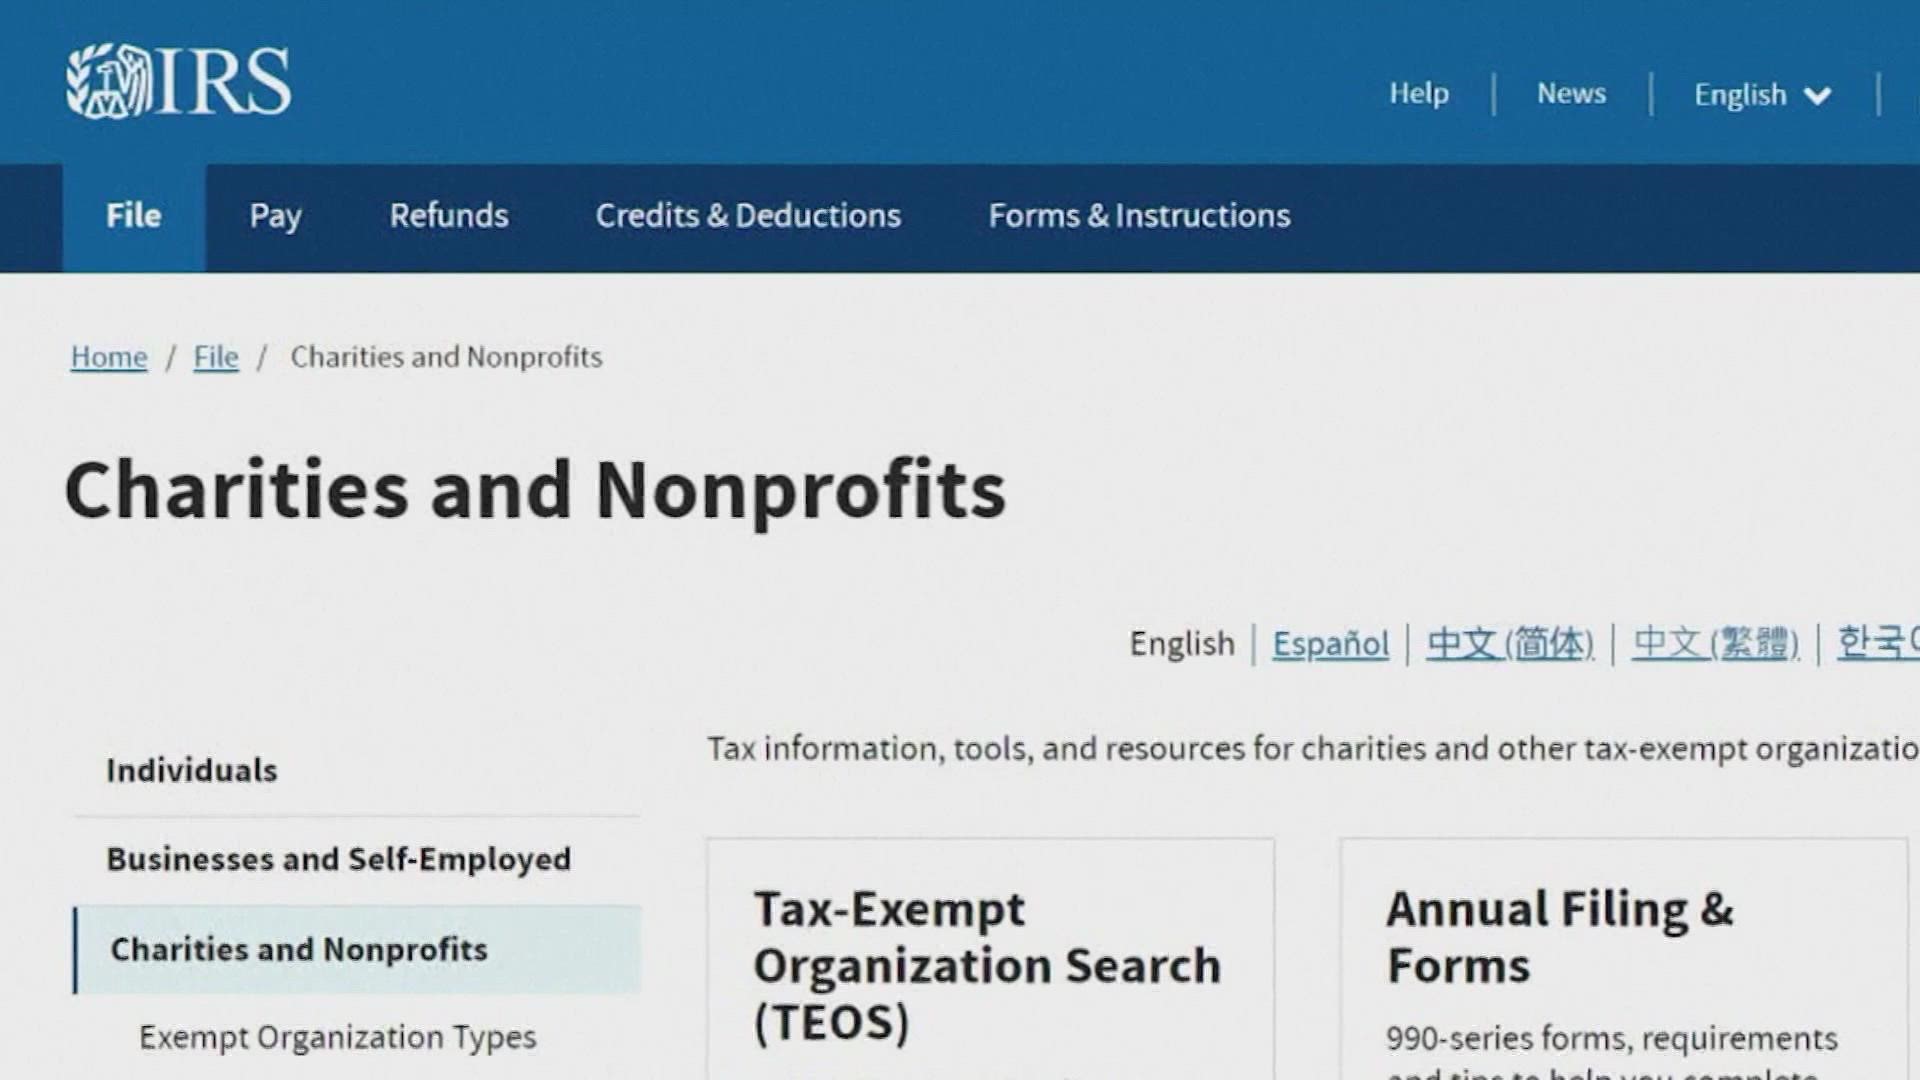 Experts say you should check to see if the charity is a 501-C3 organization and if they have an employer ID number.